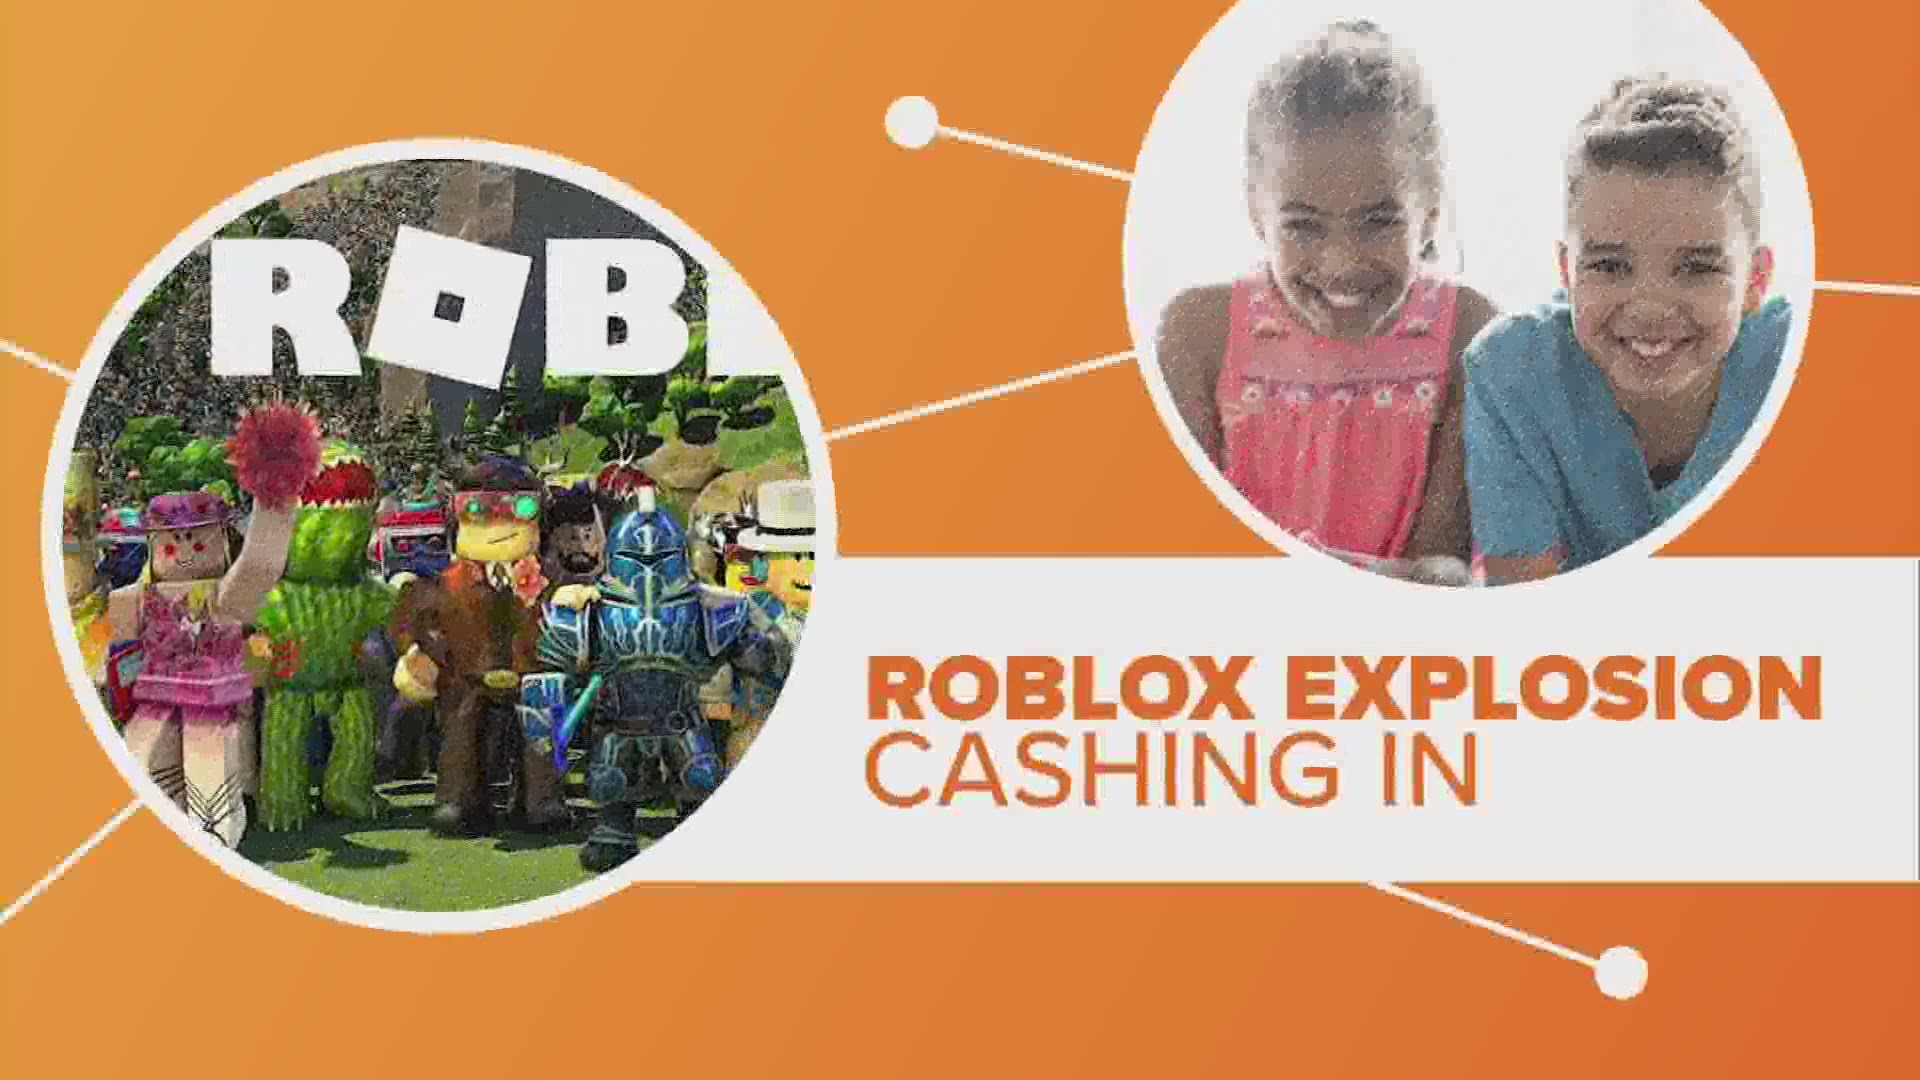 If you are a parent of kids of a certain age, you have probably heard of Roblox, and now you could possibly cash in on your child's gaming obsession.